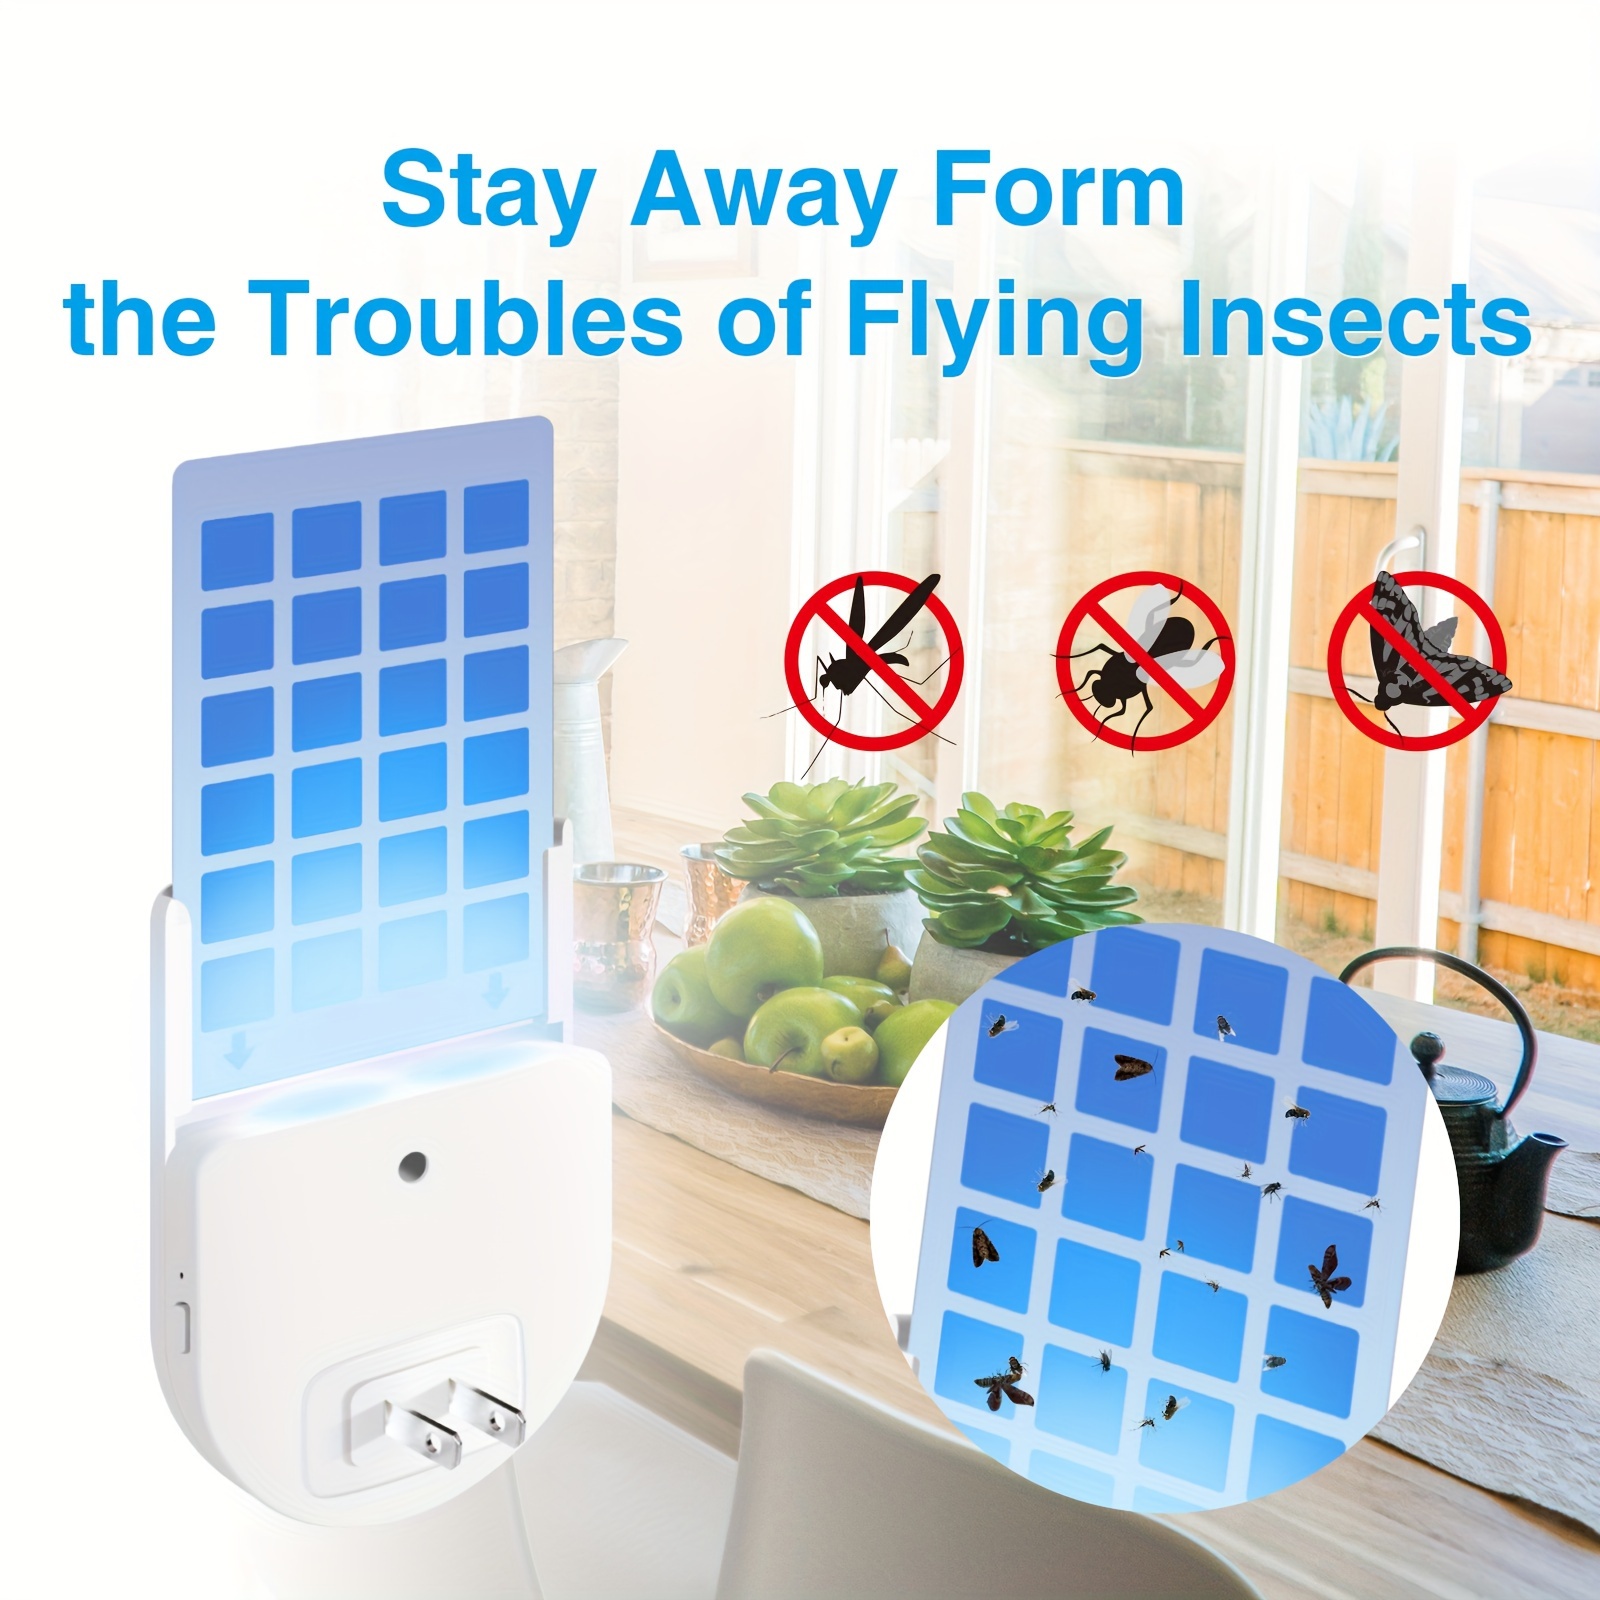 

6packs/4 Packs/2 Packs/1 Pack Flying Insect Trap Plug-in Mosquito Killer Indoor Gnat Moth Catcher Fly Tapper With Night Light Uv Attractant Catcher For Home Office White, Bring 10 Plastic Cards